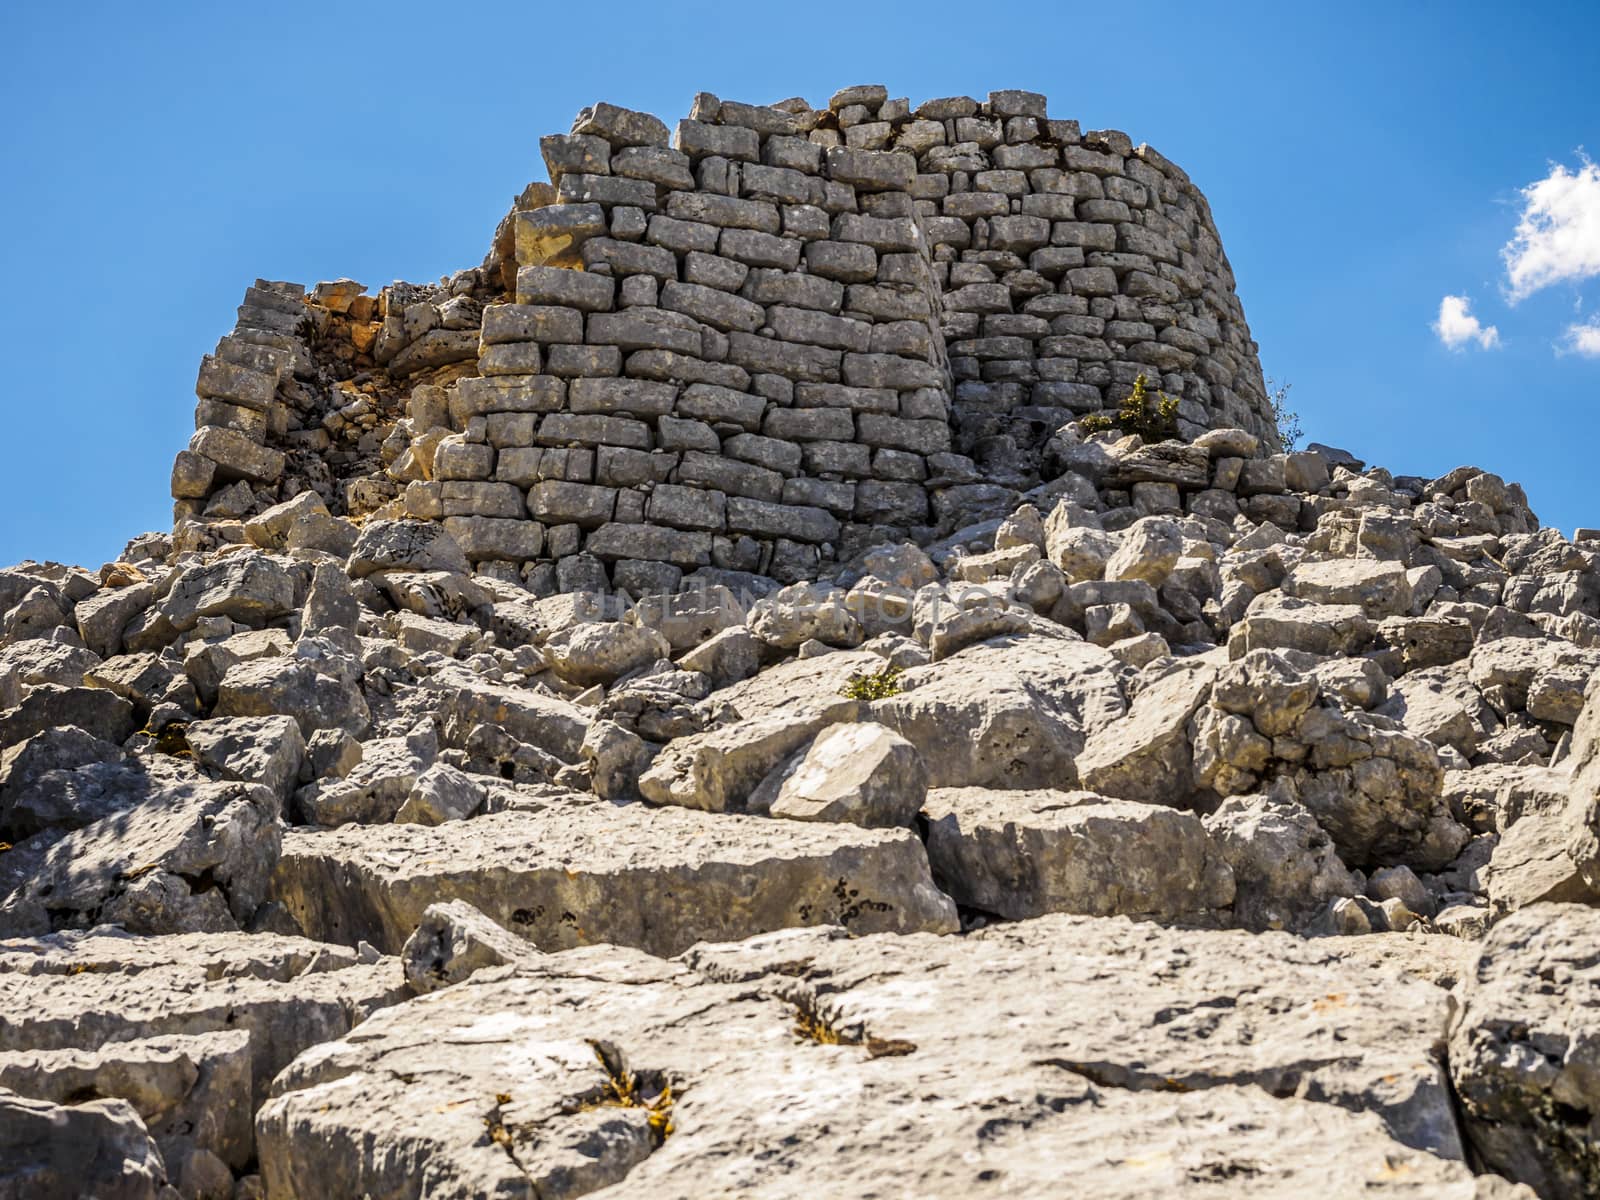 The nuraghe is the main type of ancient megalithic edifice found in Sardinia, developed during the Nuragic Age between 1900 and 730 BCE.Today it has come to be the symbol of Sardinia and its distinctive culture, the Nuragic civilization.